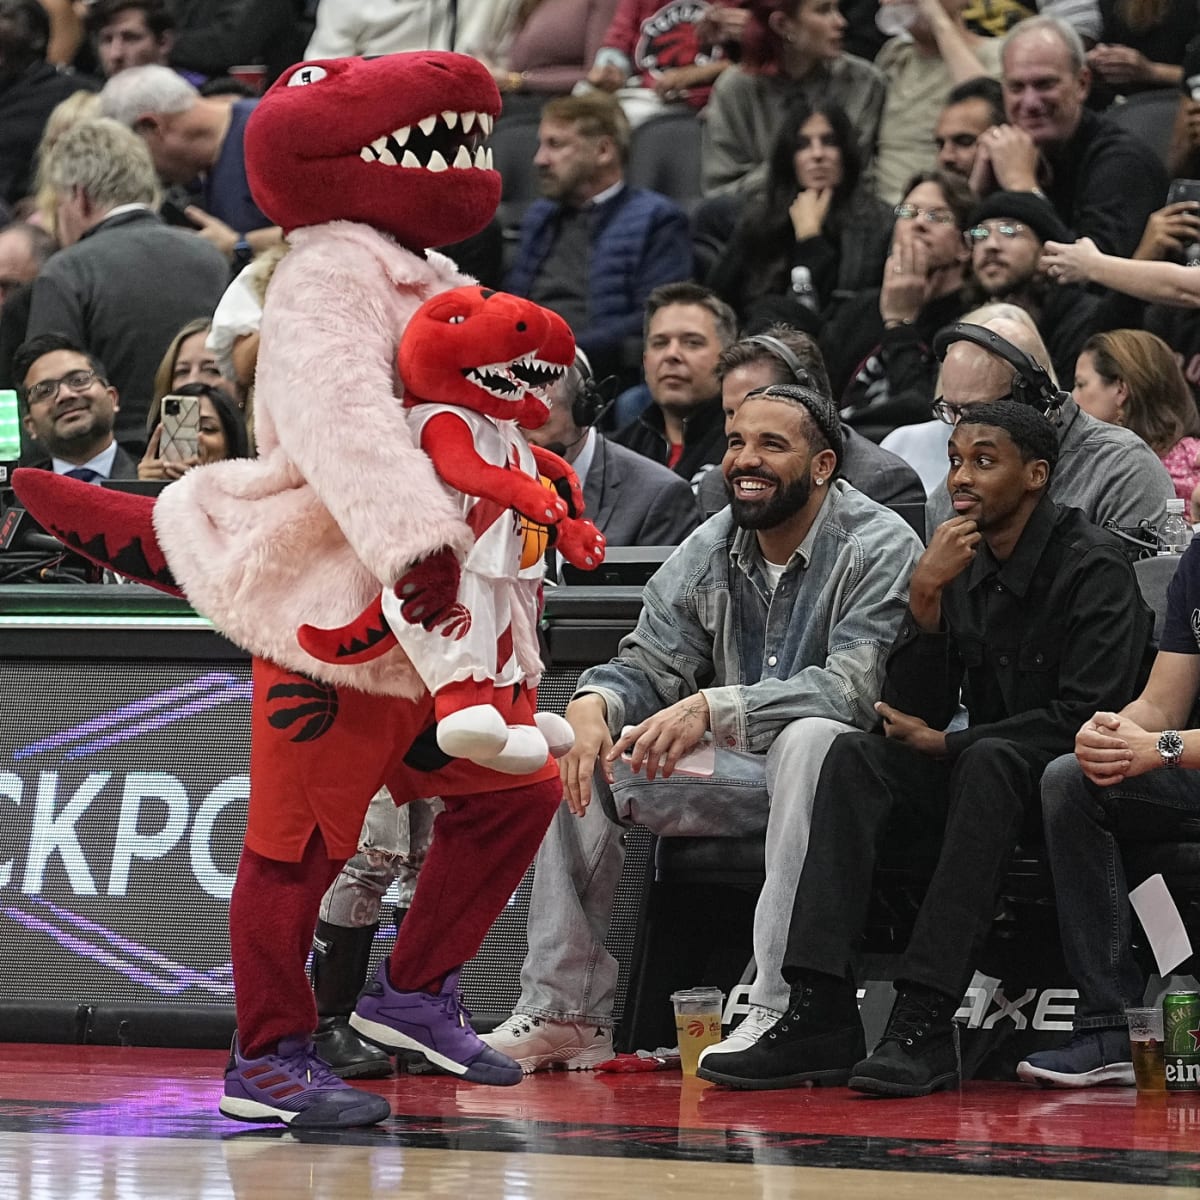 Drake gifted diamond-studded jacket worth hundreds of thousands of dollars  before Raptors game